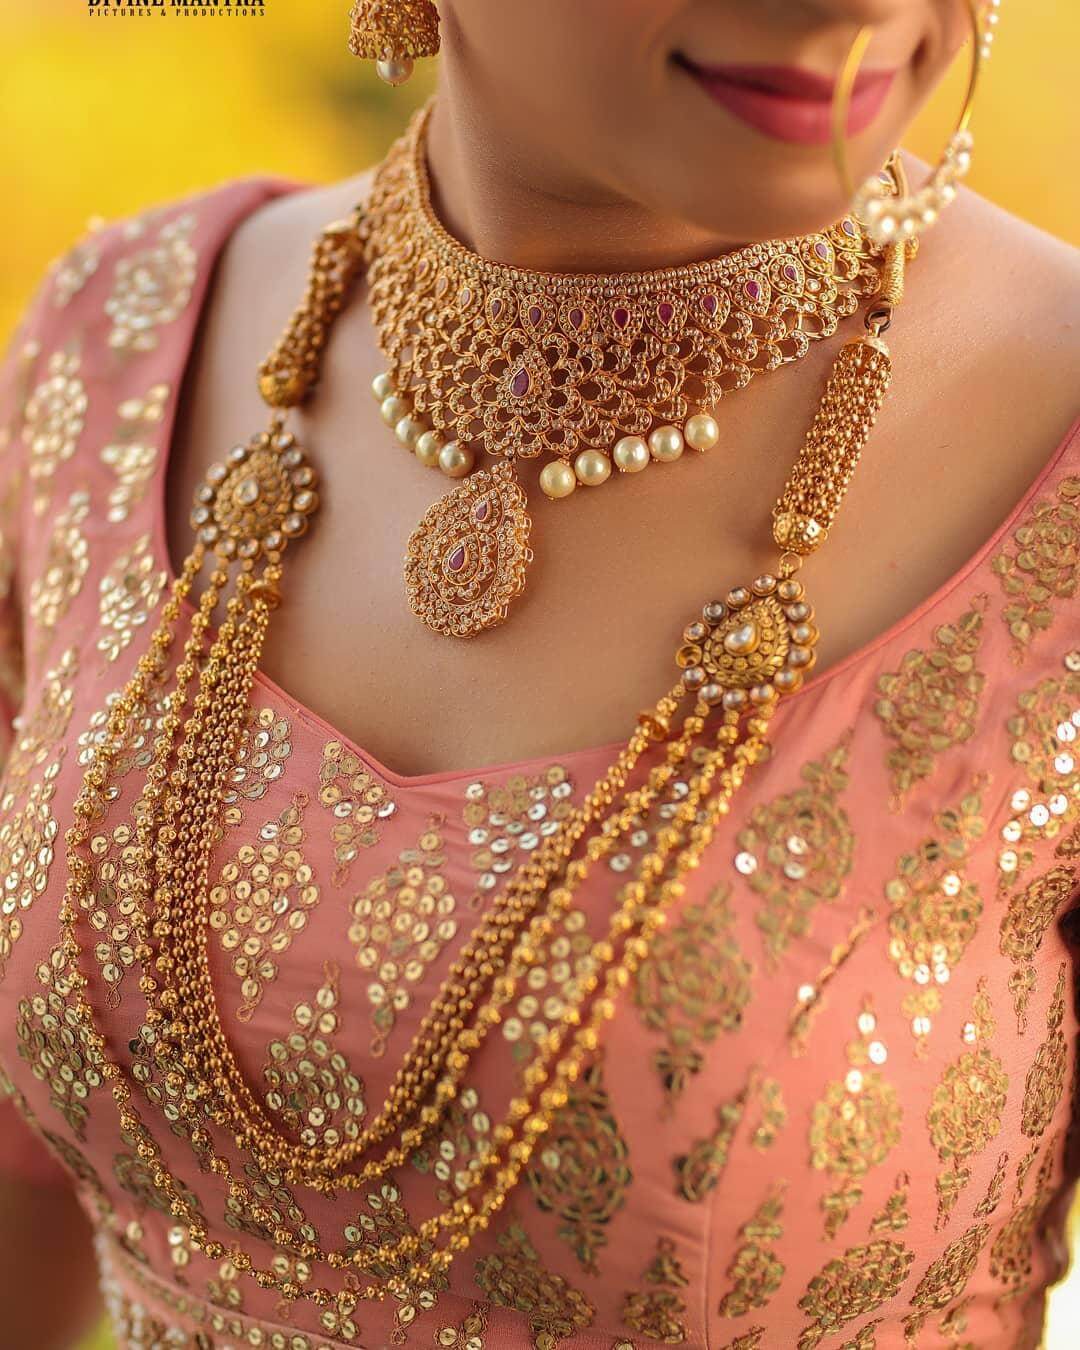 “Stunning Collection of Full 4K Gold Necklace Designs for Weddings – Over 999 Images”